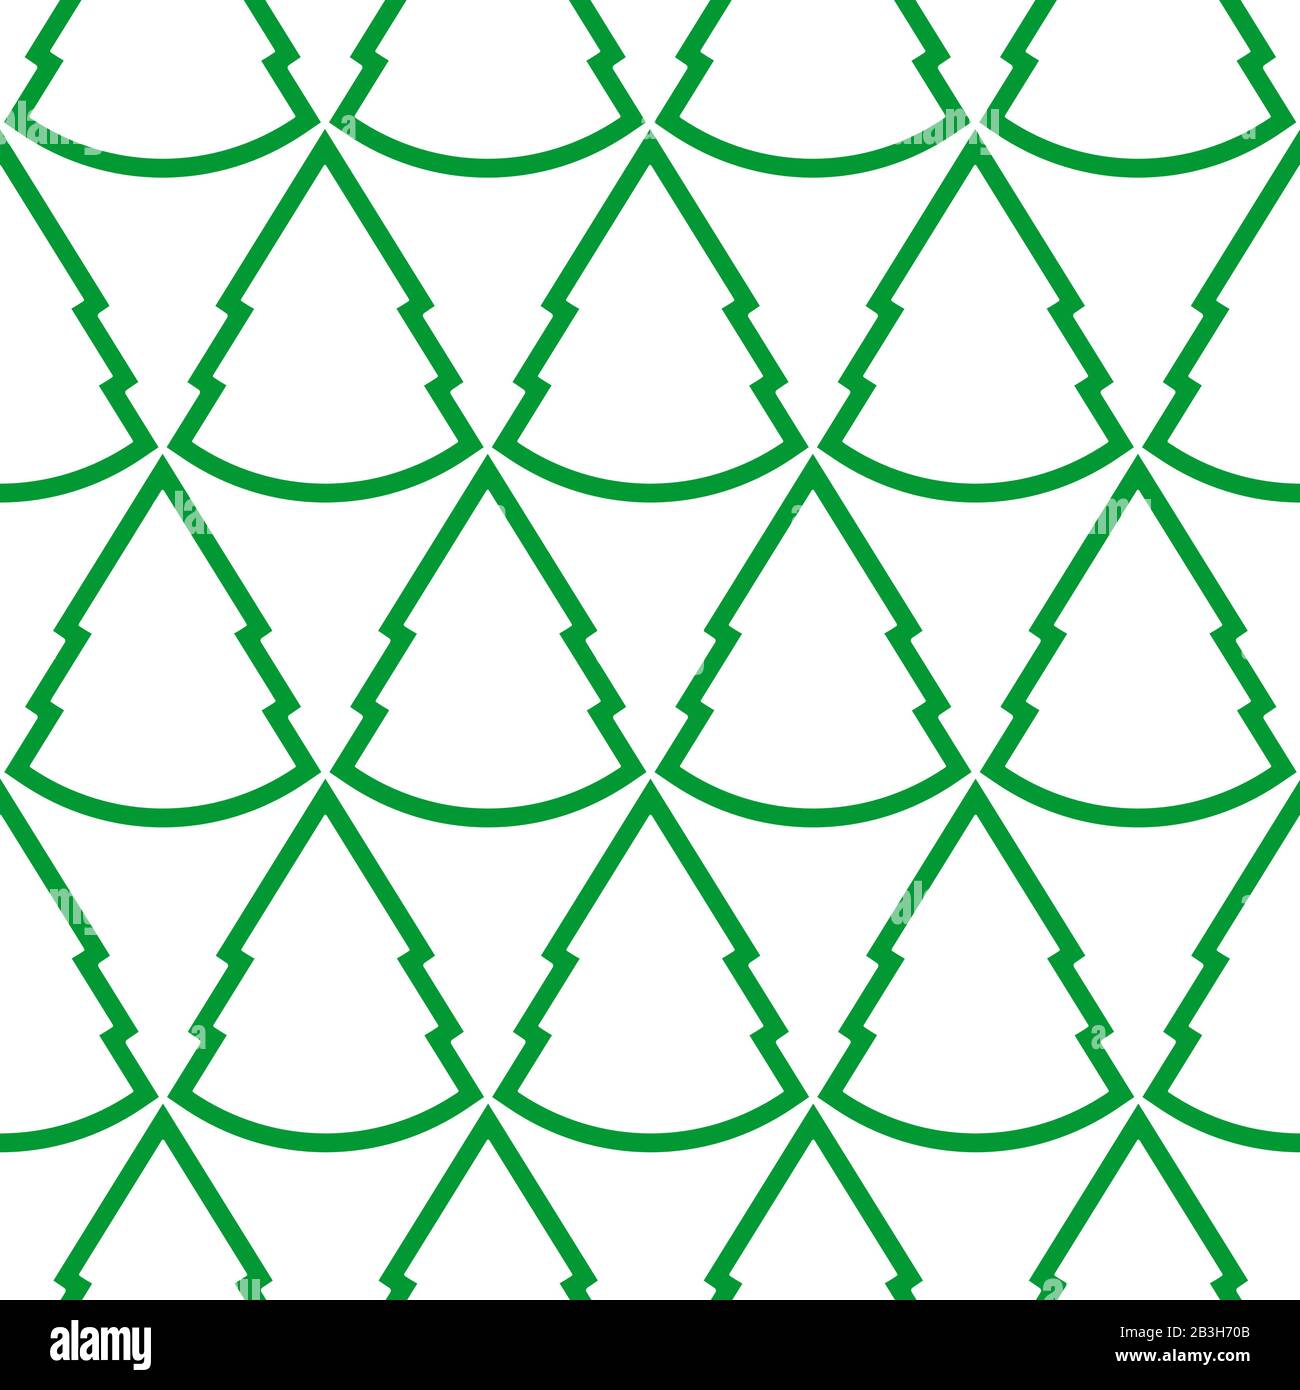 Seamless Geometric Pattern Of Christmas Trees. New Year. Green Pattern On A White Background. For Decoration, Textile, Fabric, Wrapping Paper, Engravi Stock Vector